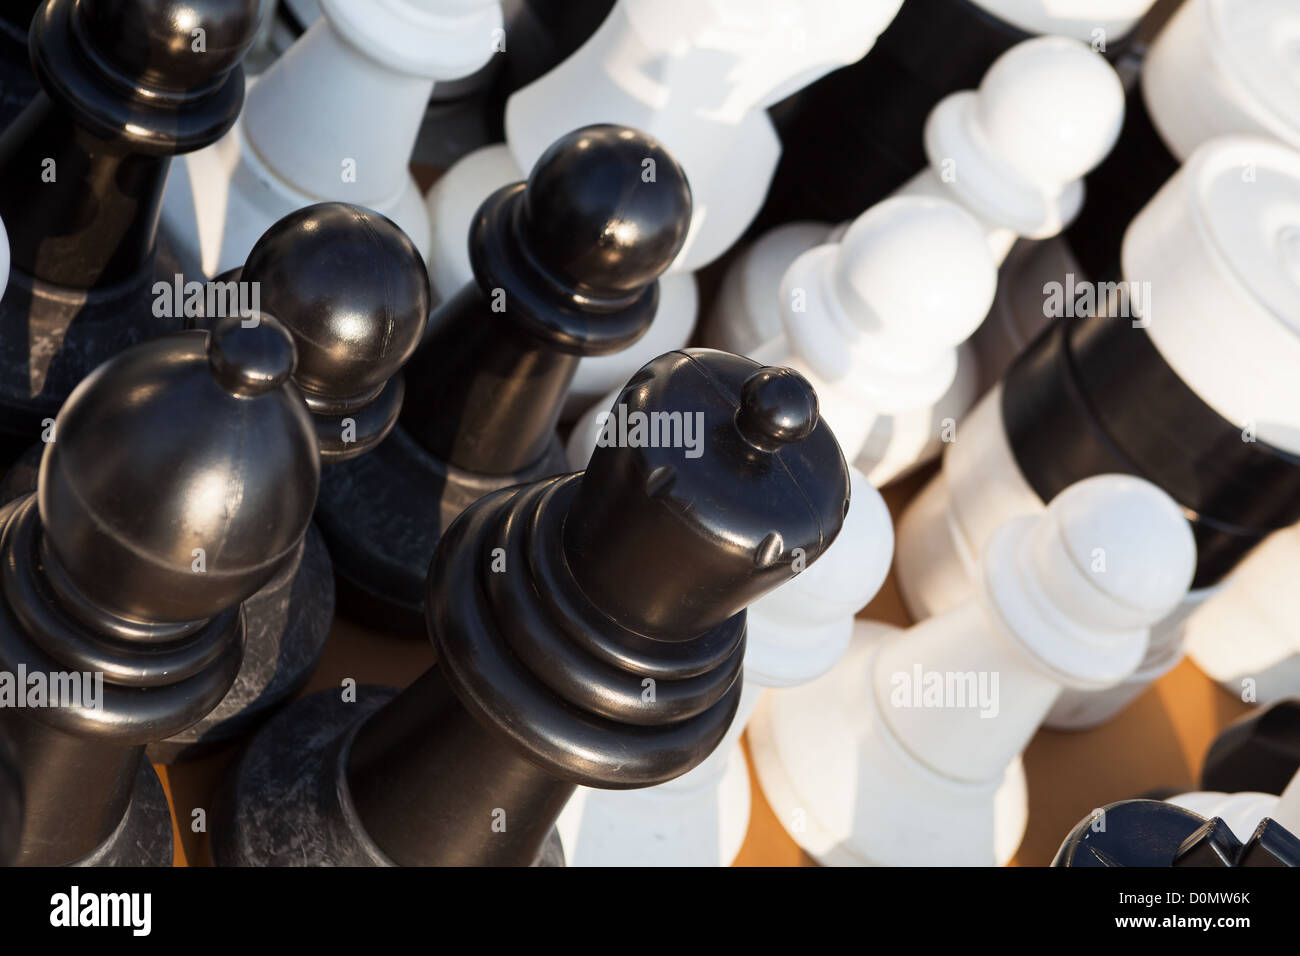 Black and white chessmen on board cruise ship. Cunard's Queen Victoria. Stock Photo